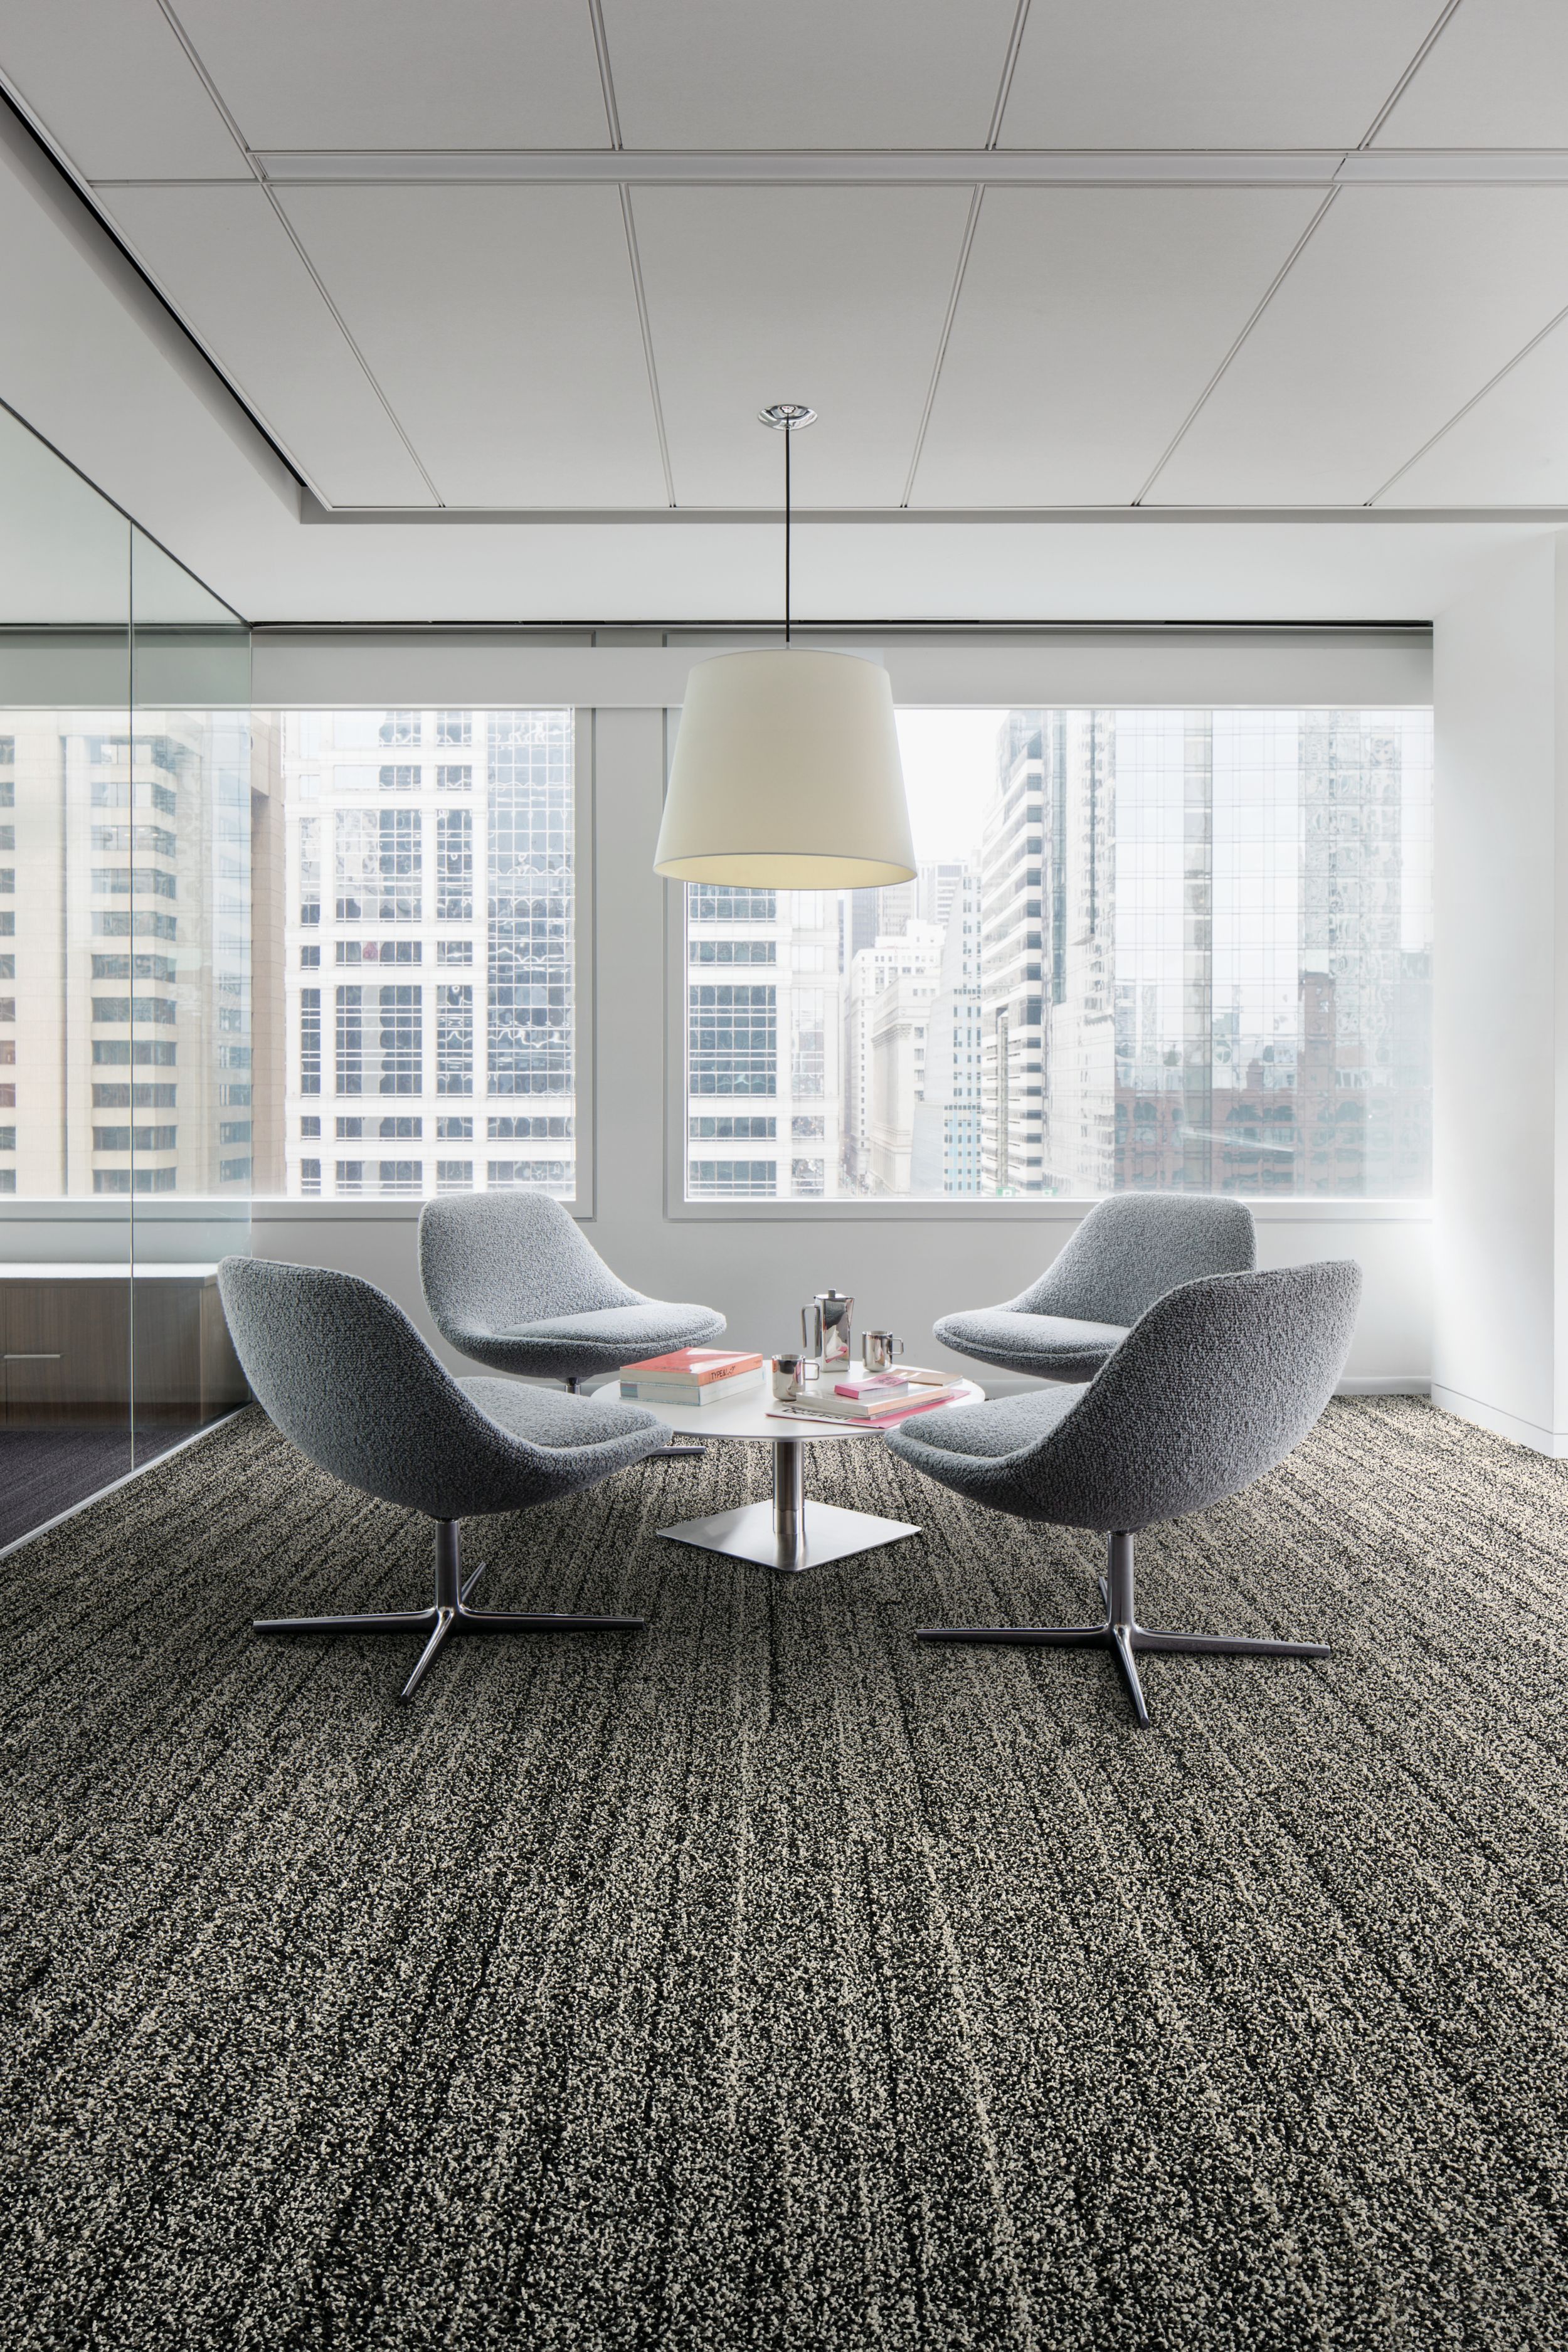 Interface Overedge plank carpet tile with fabric chairs around round table Bildnummer 6